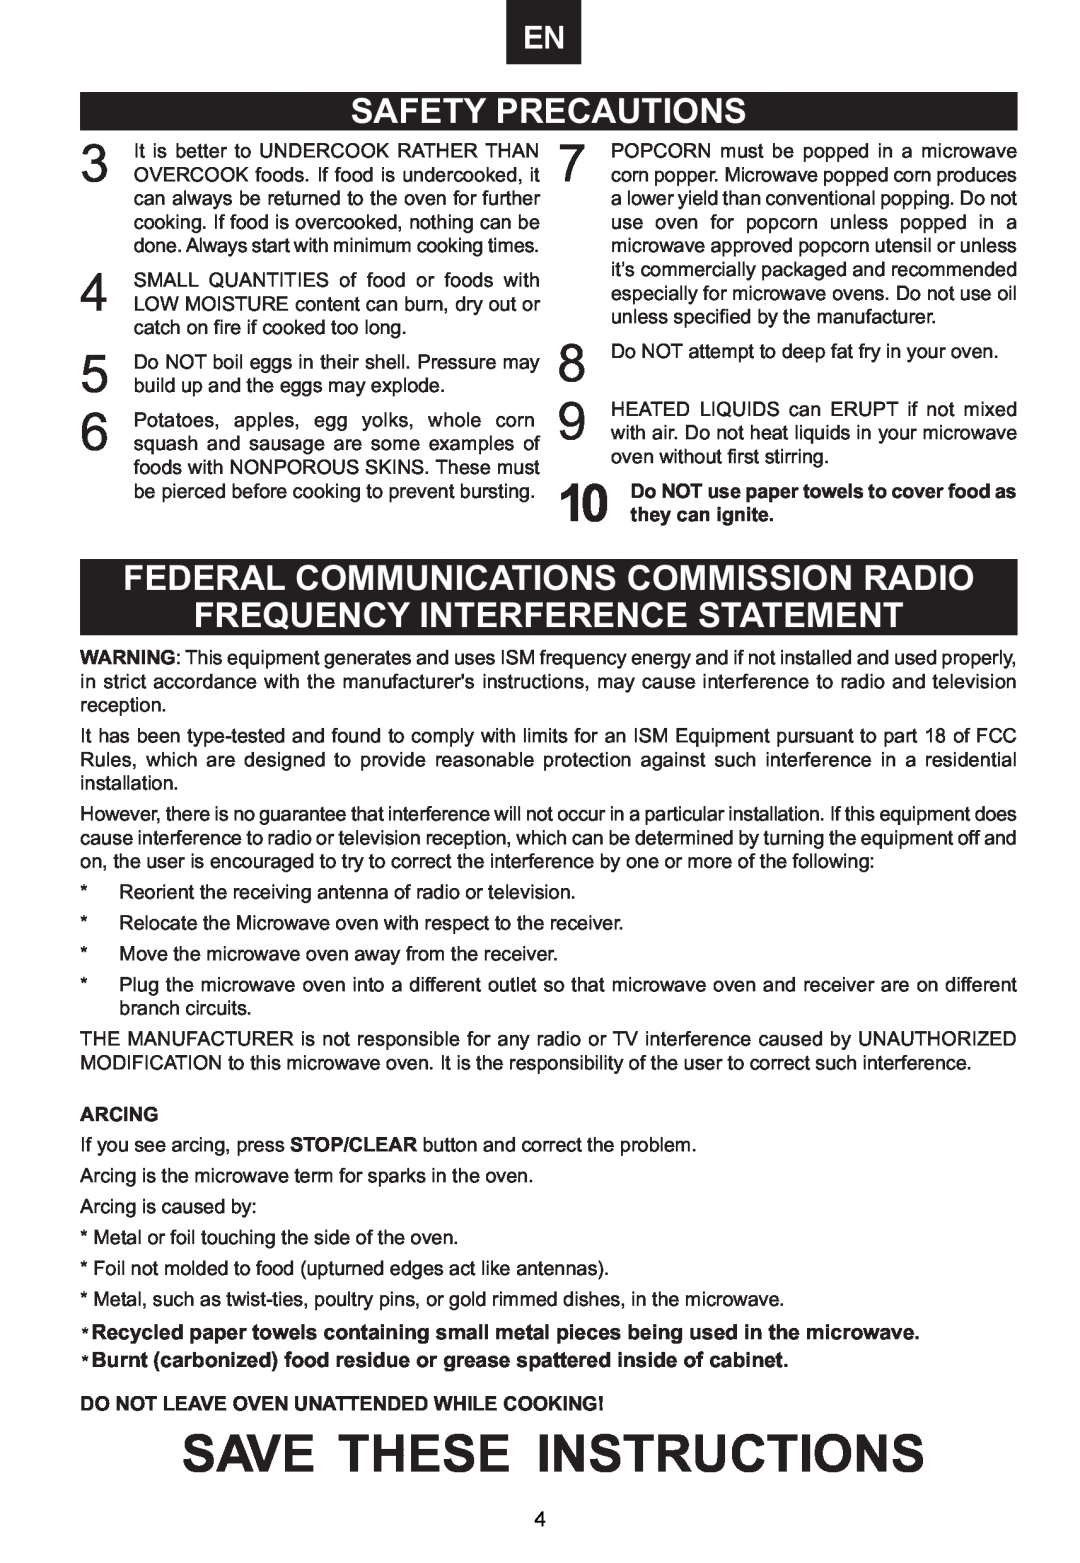 Emerson MWCG1584SB Safety Precautions, Federal Communications Commission Radio, Frequency Interference Statement, Arcing 